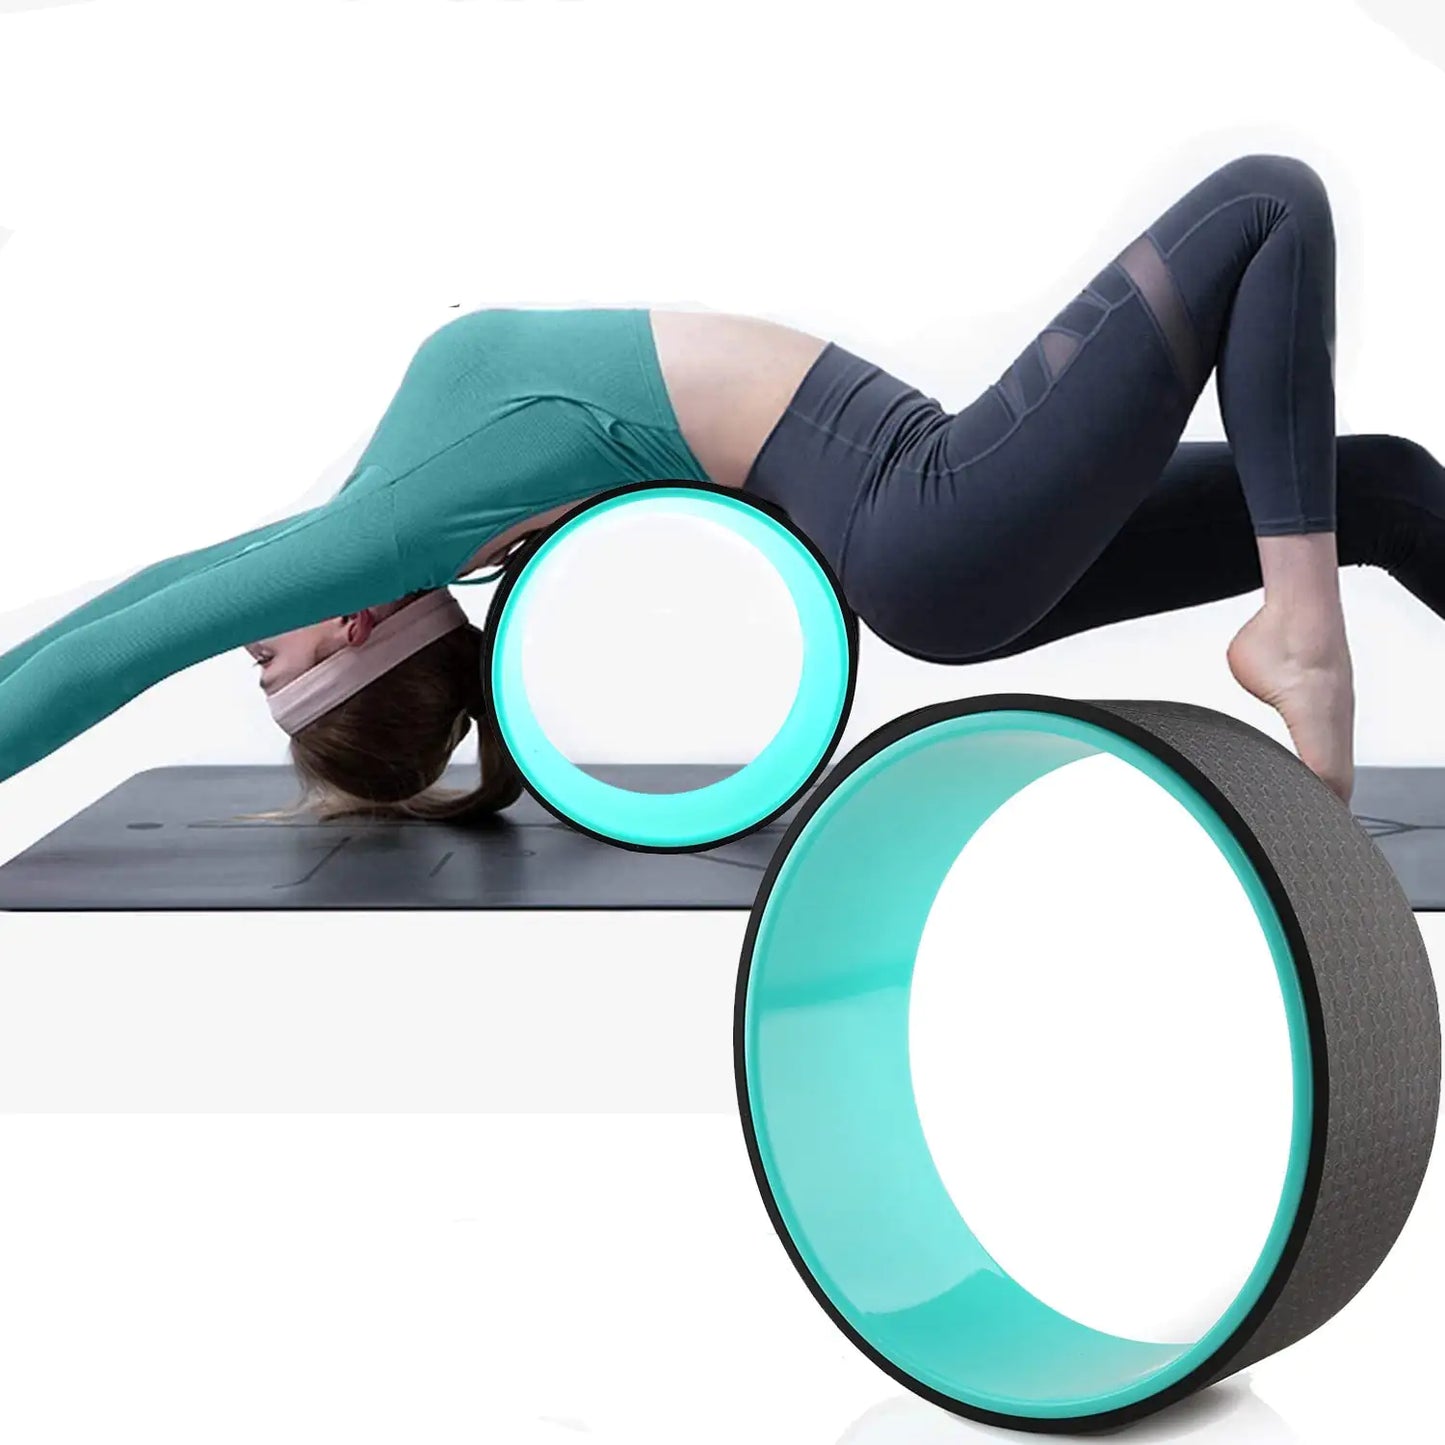 Professional Yoga Wheel For Deeper Poses & Core Strength